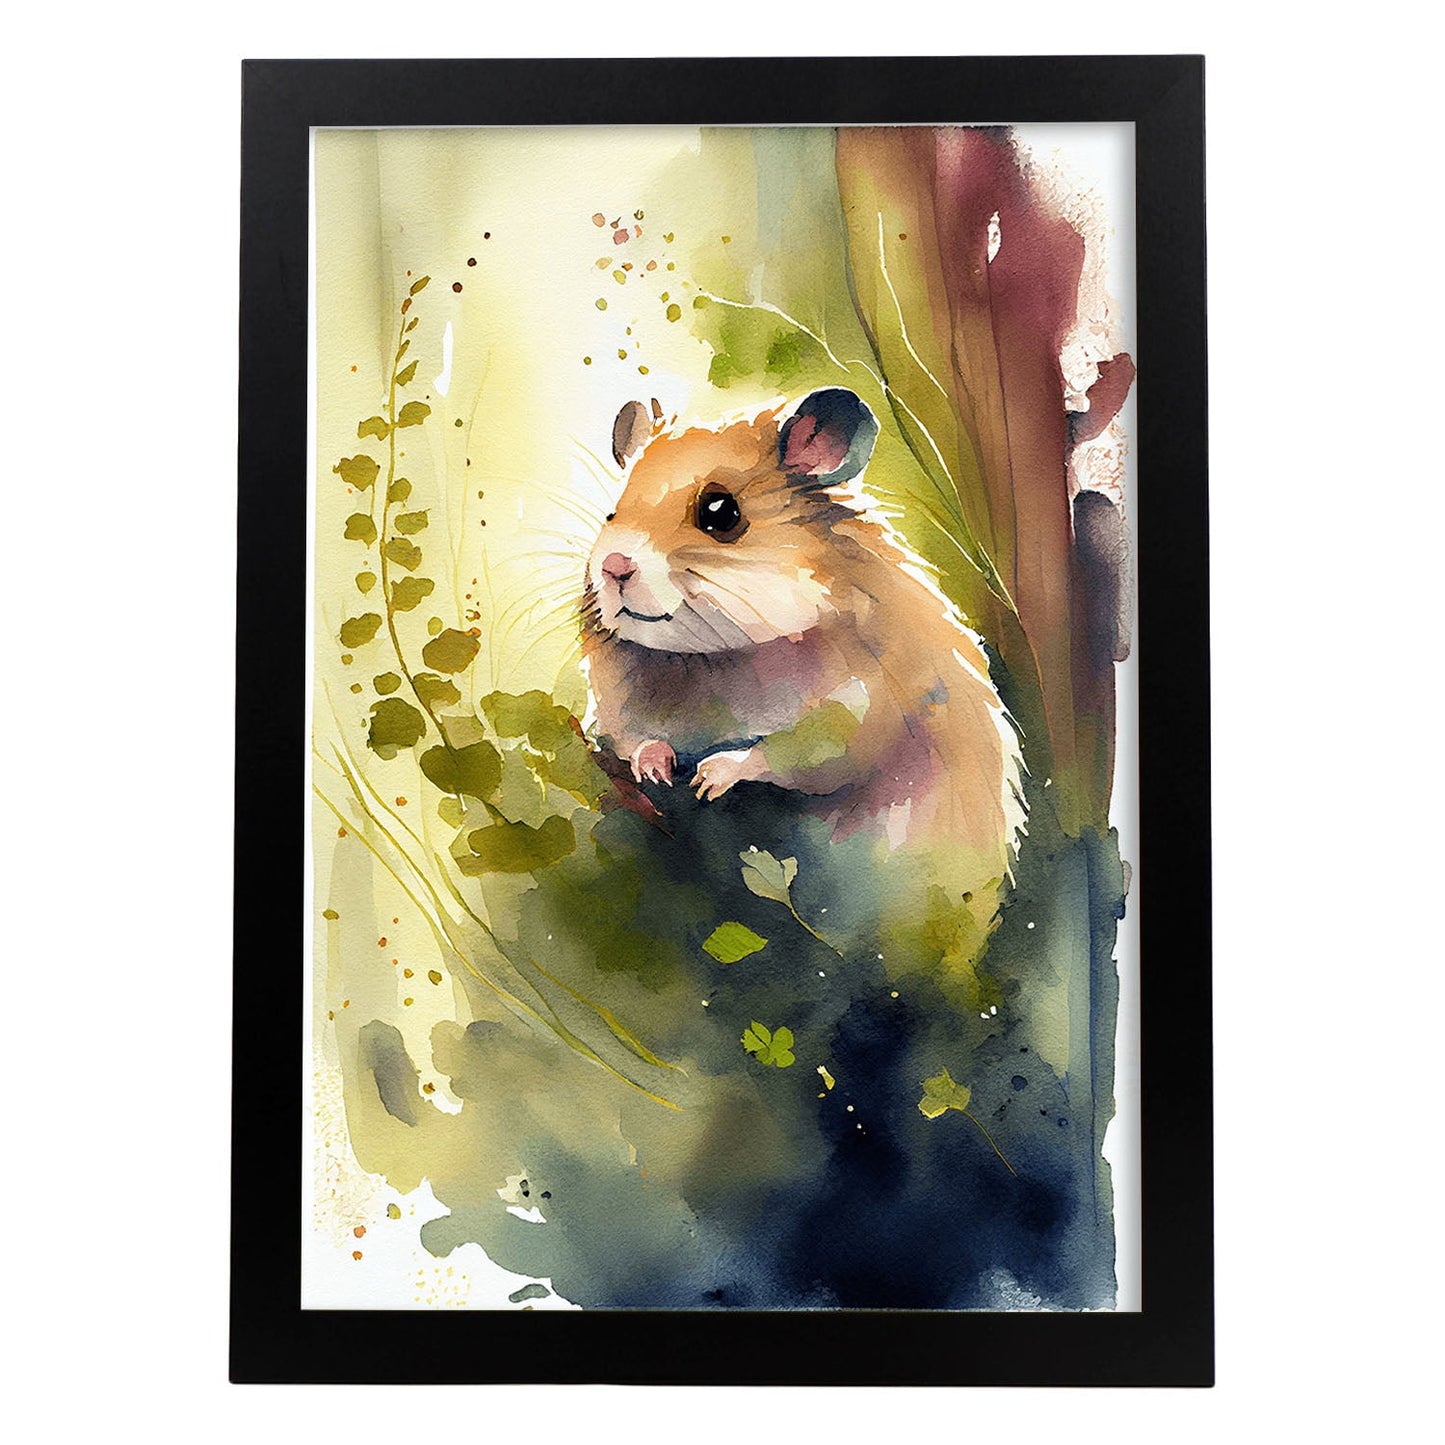 Nacnic Watercolor of Hamster in the forest_1. Aesthetic Wall Art Prints for Bedroom or Living Room Design.